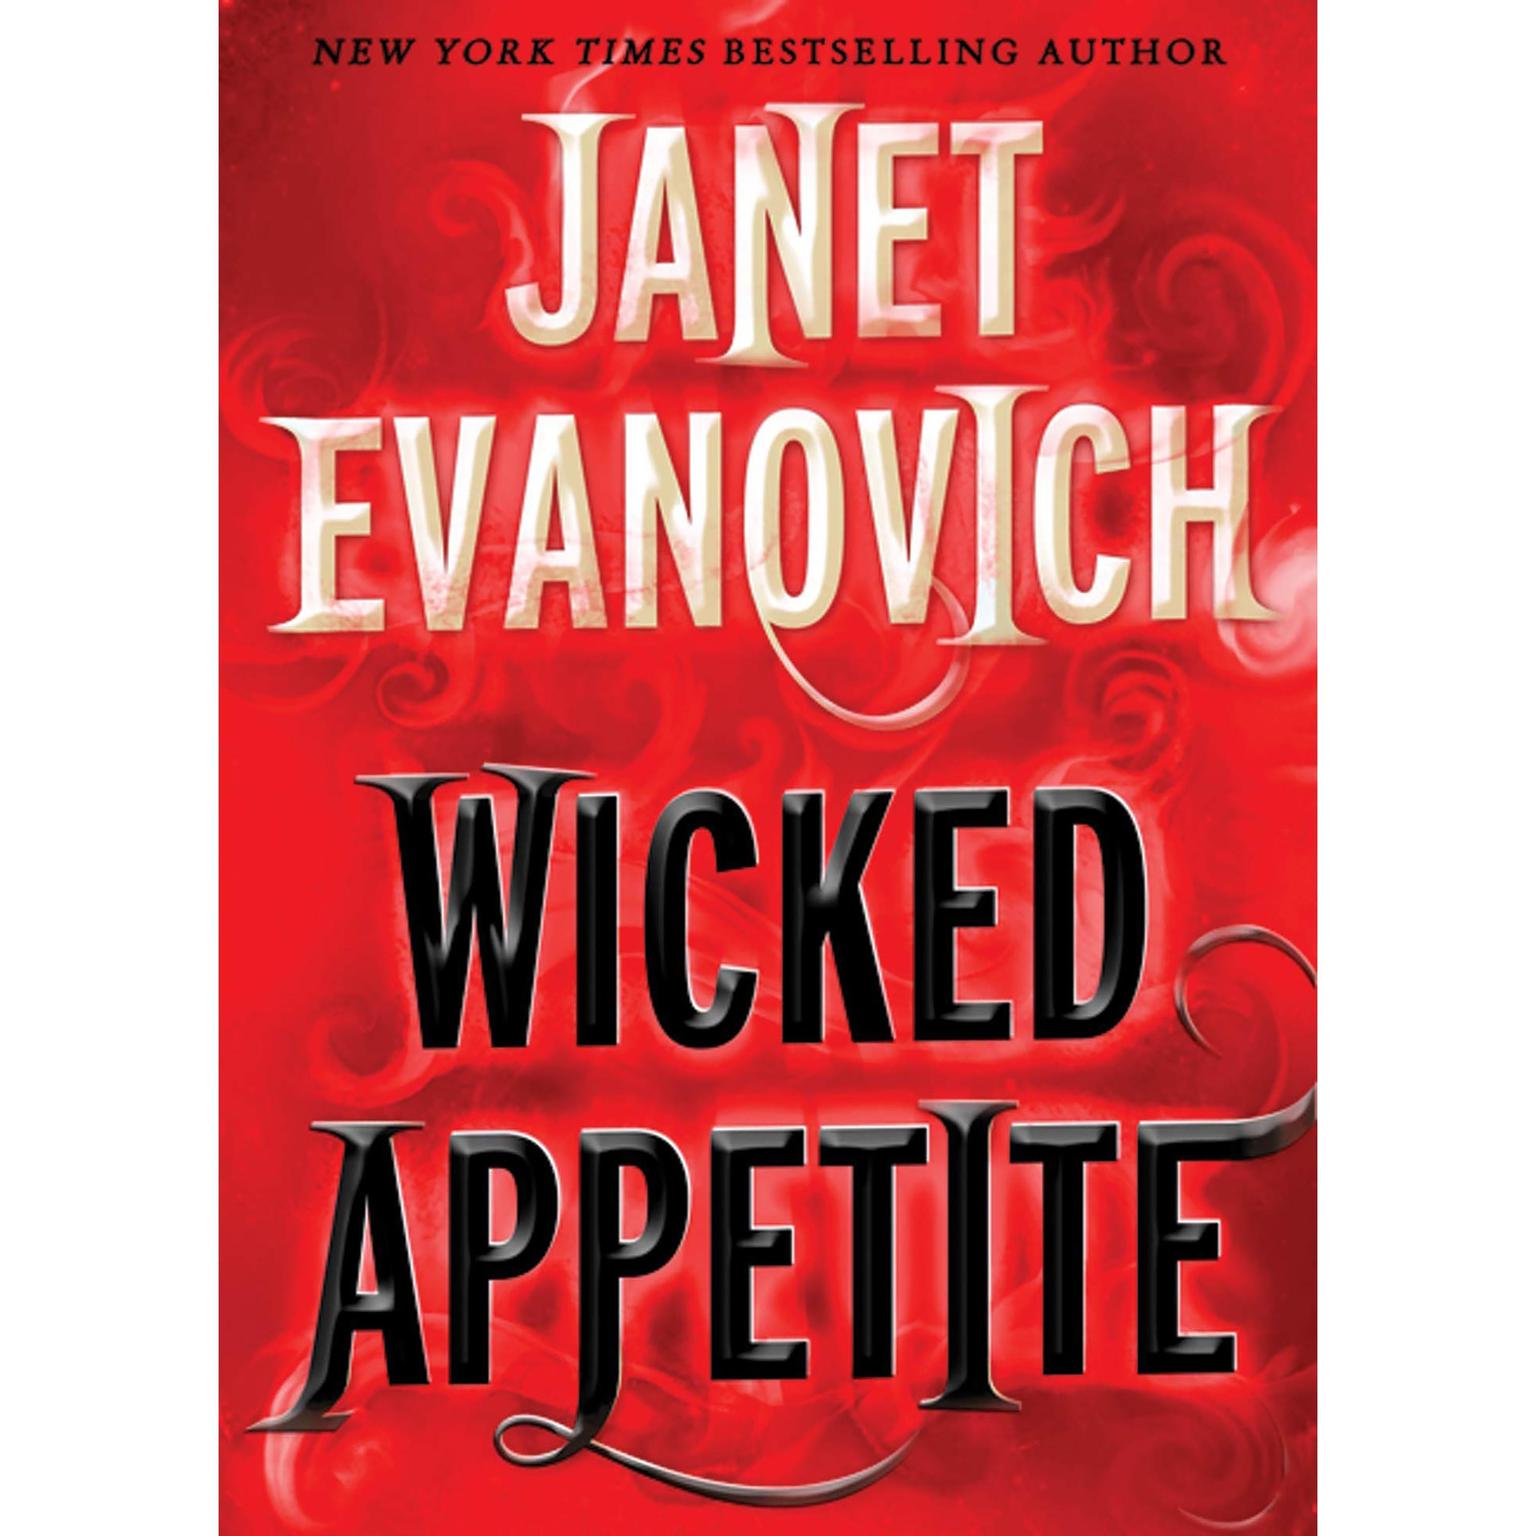 Wicked Appetite (Abridged) Audiobook, by Janet Evanovich